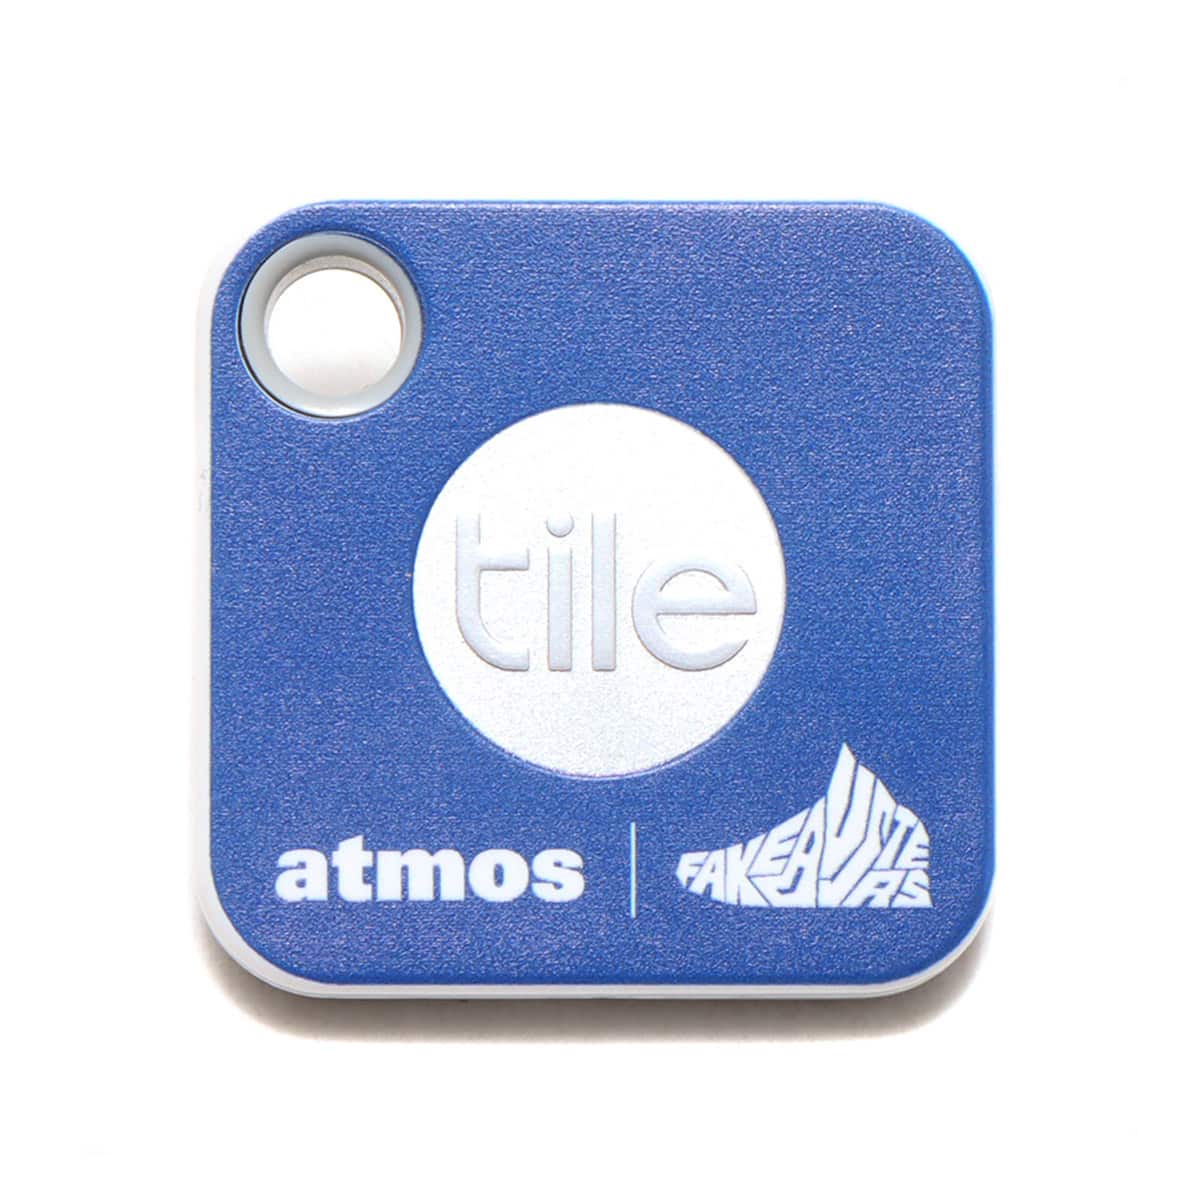 Tile Mate (2020) for atmos FAKE BUSTERS BLUE 22SU-S_photo_large